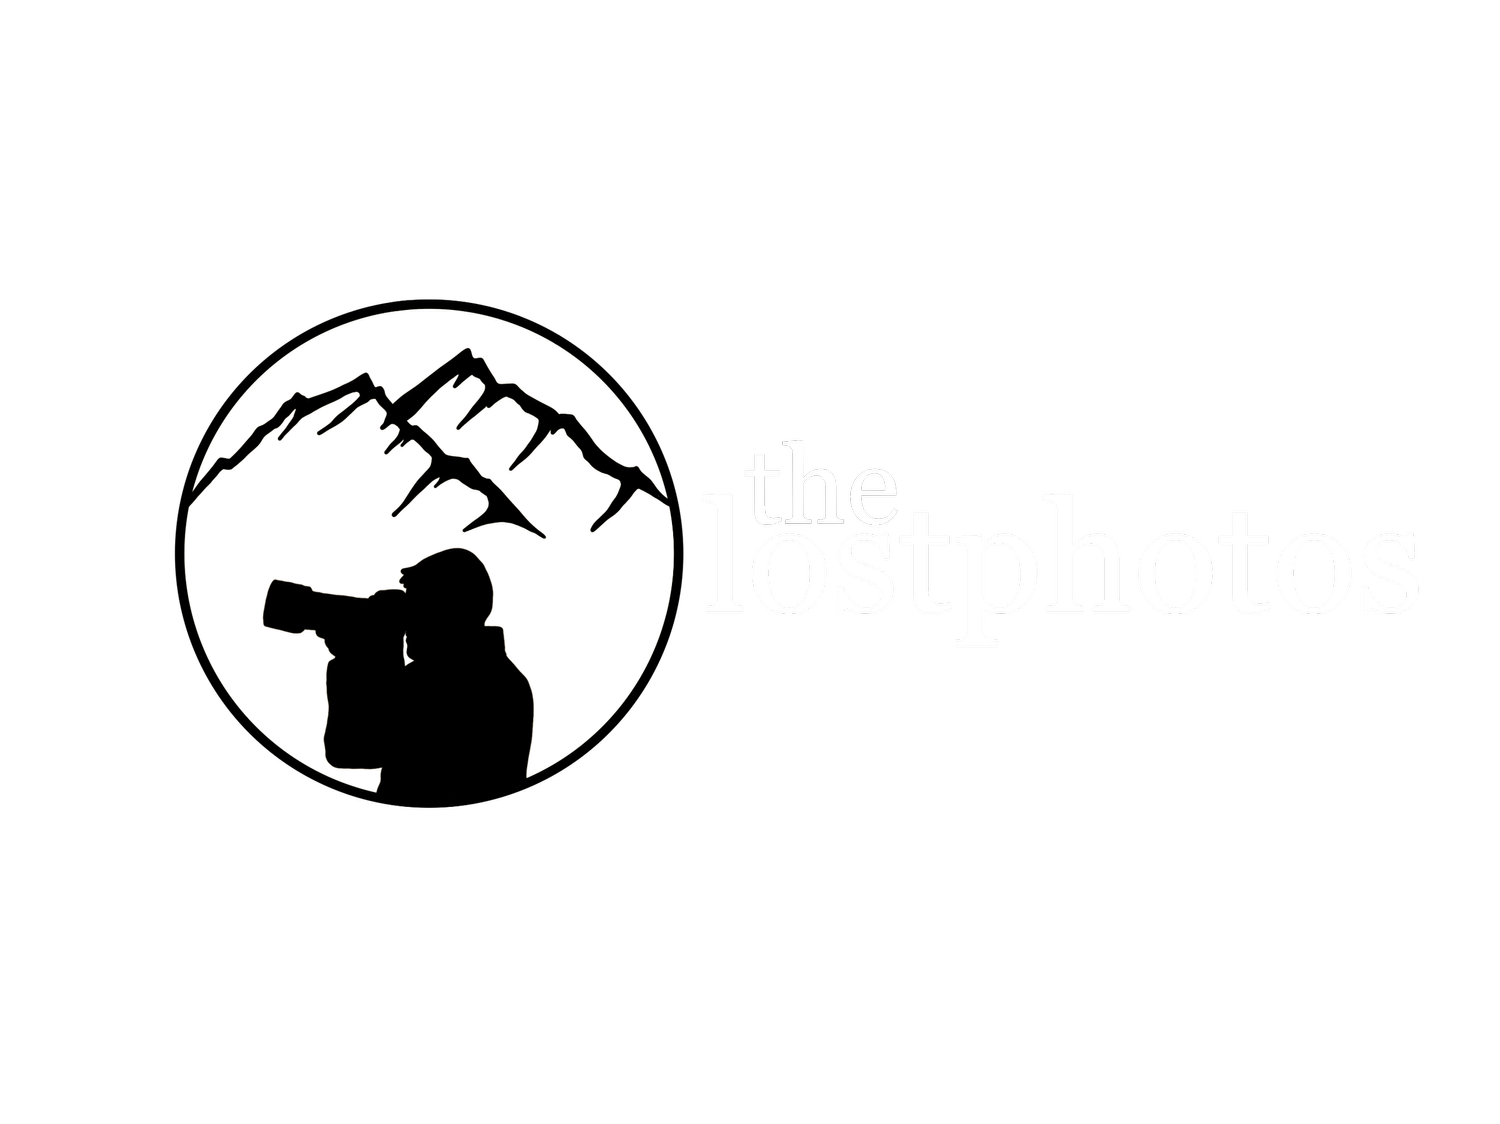 The Lost Photos